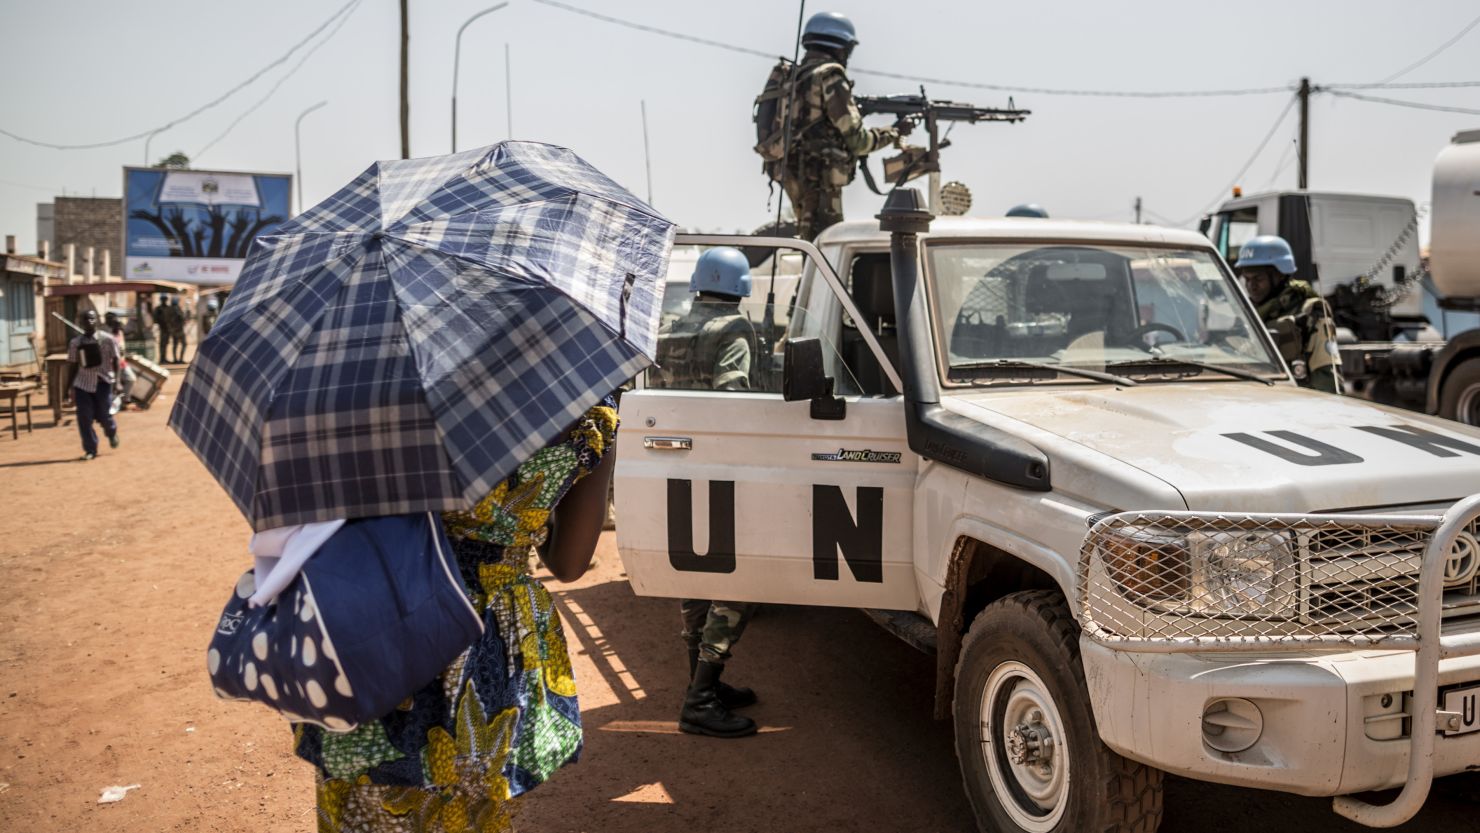 Senegalese soldiers from the UN force patrol in December 2015.